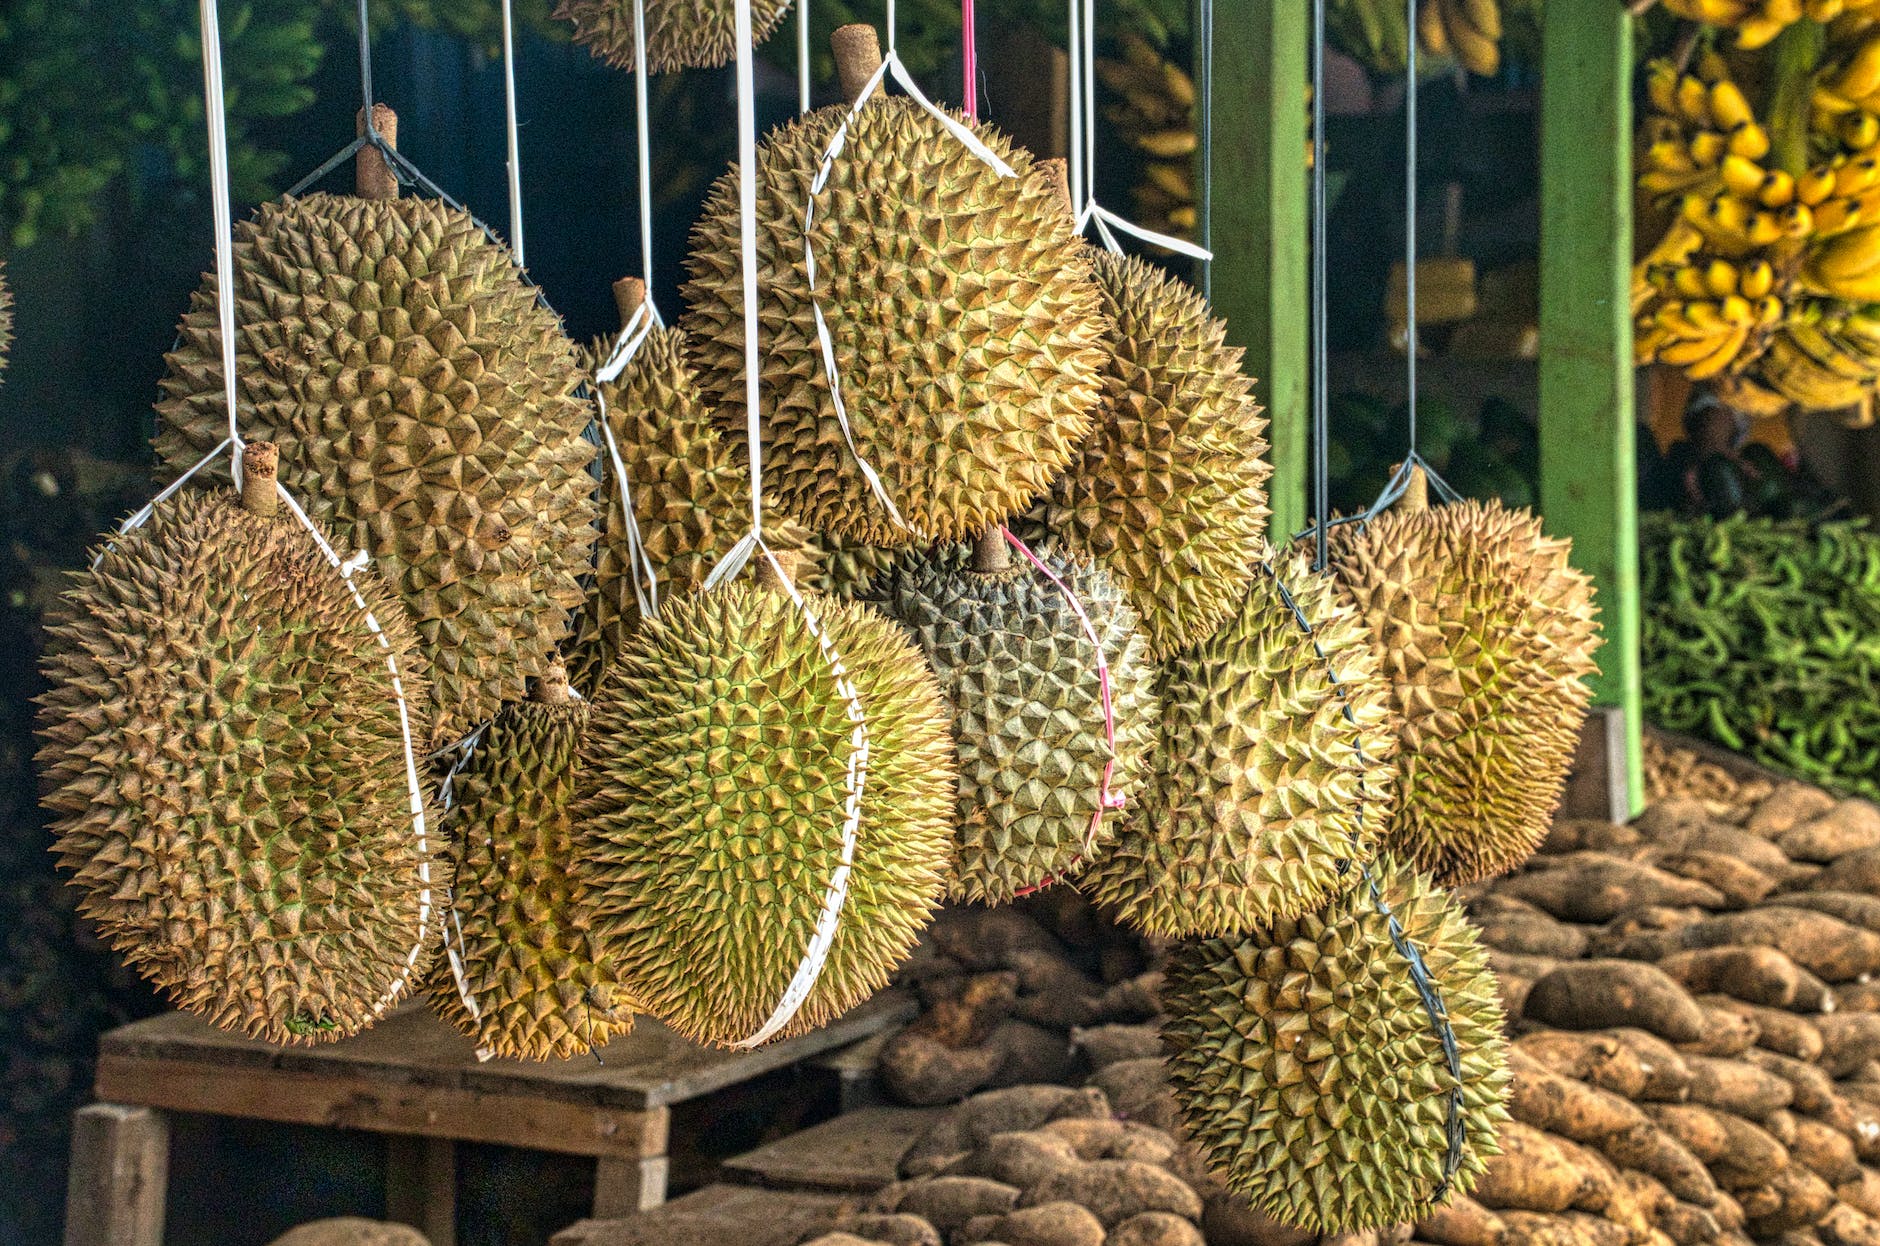 Mao Shan Wang Durian is the Most Sought-After Durian Variety in the World